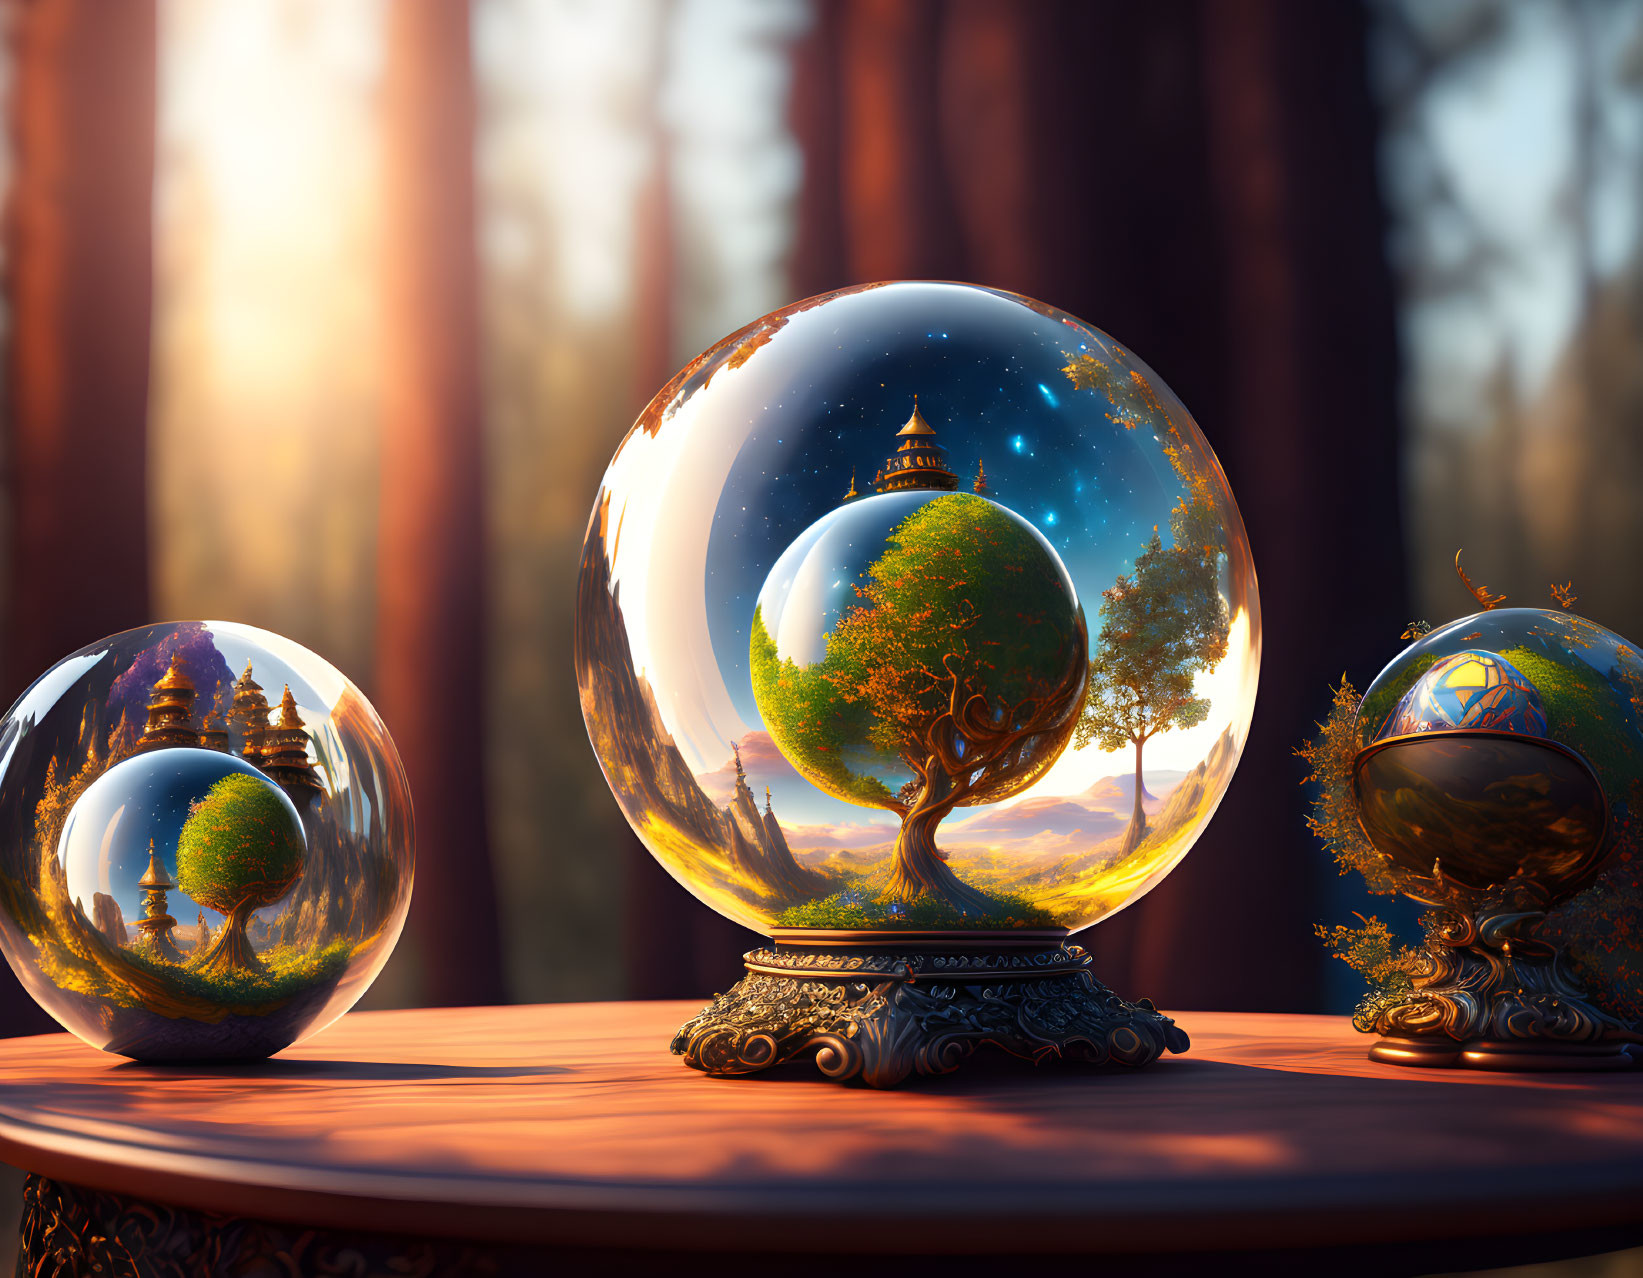 Intricately Detailed Miniature Worlds in Spheres on Wooden Surface